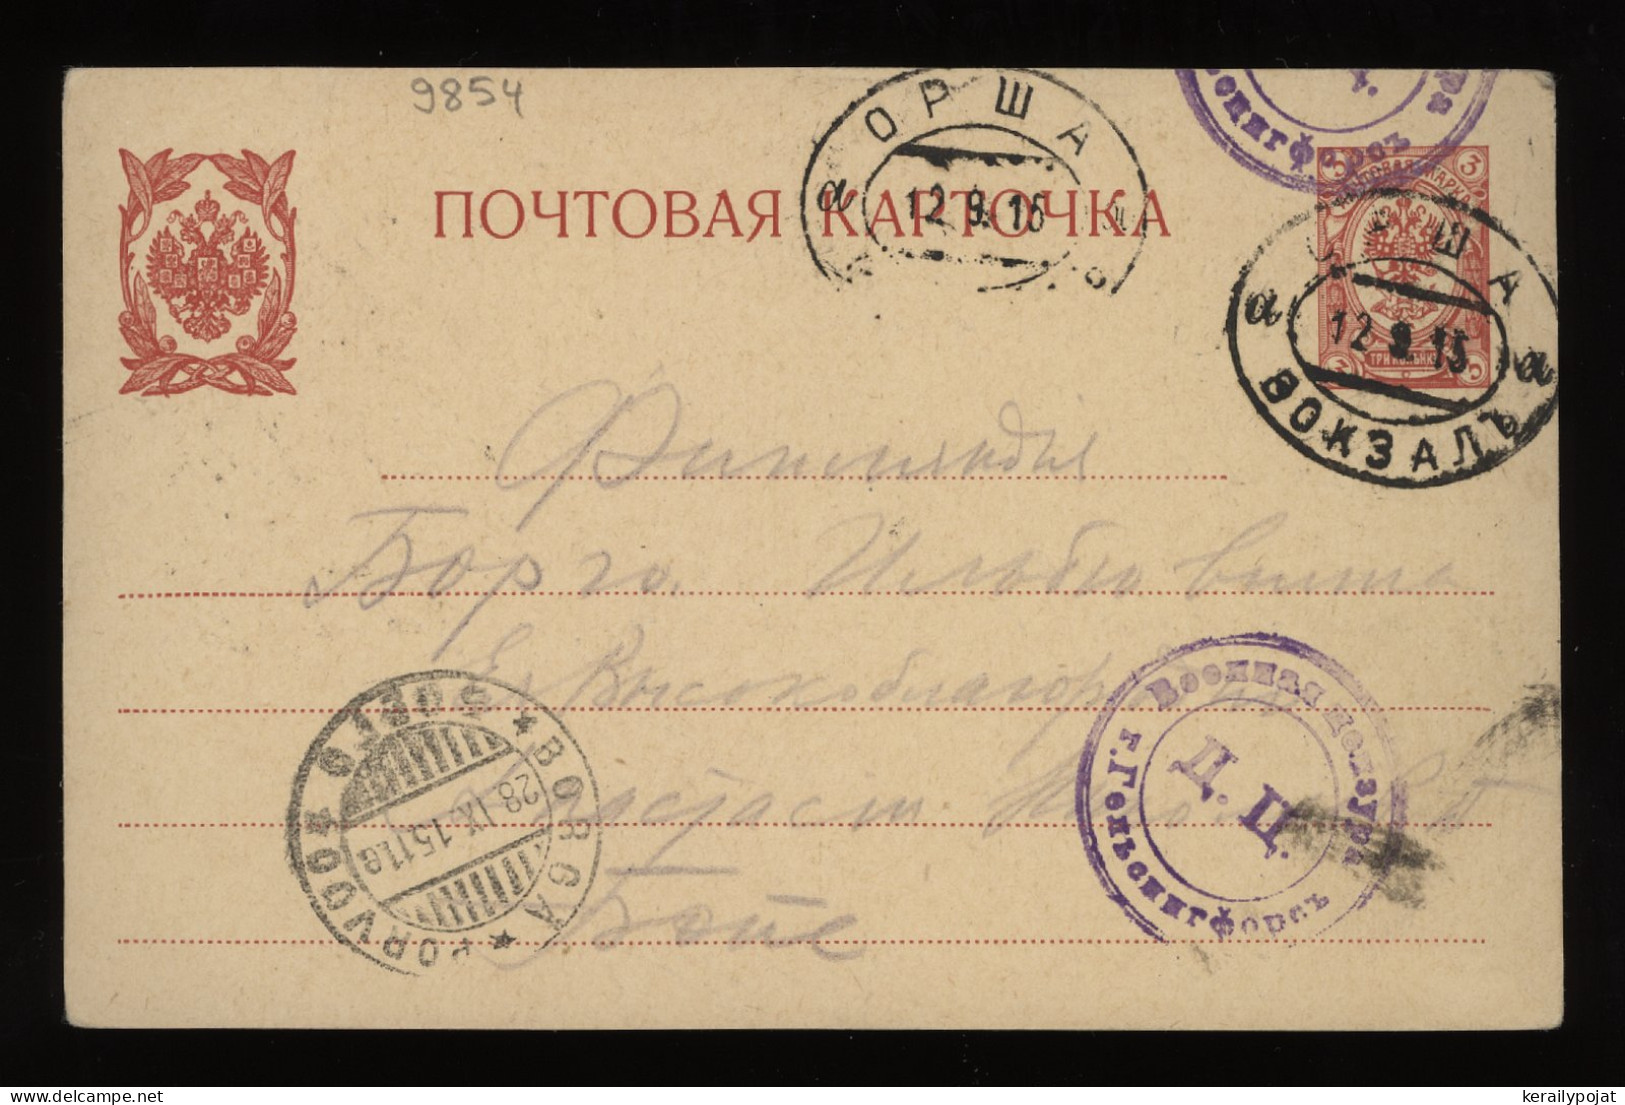 Russia 1915 3k Red Stationery Card To Finland__(9854) - Ganzsachen